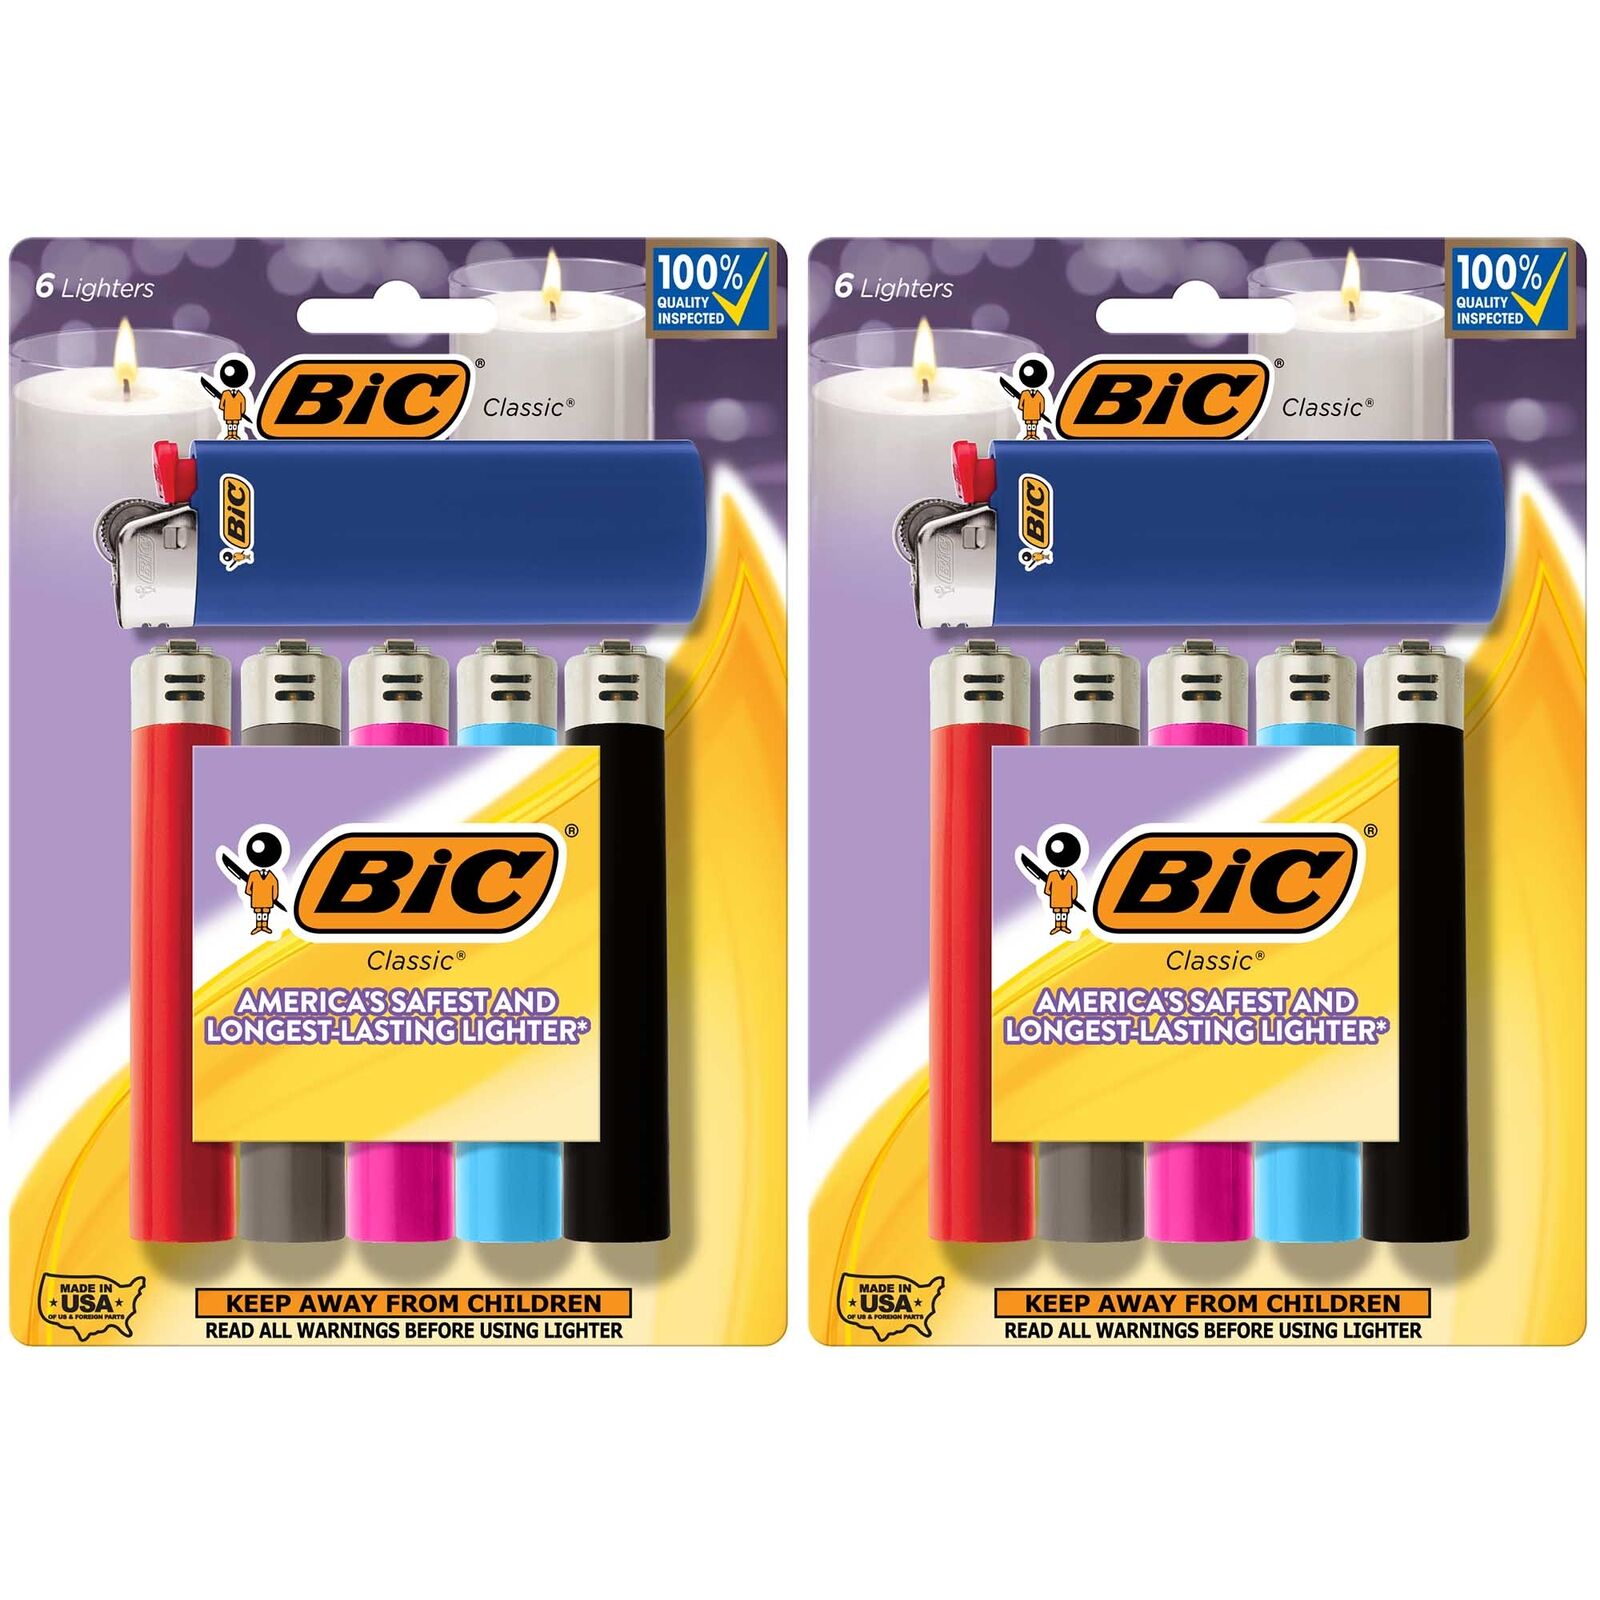 BIC Classic Lighter, Assorted Colors, 12-Pack (Packaging May Vary)